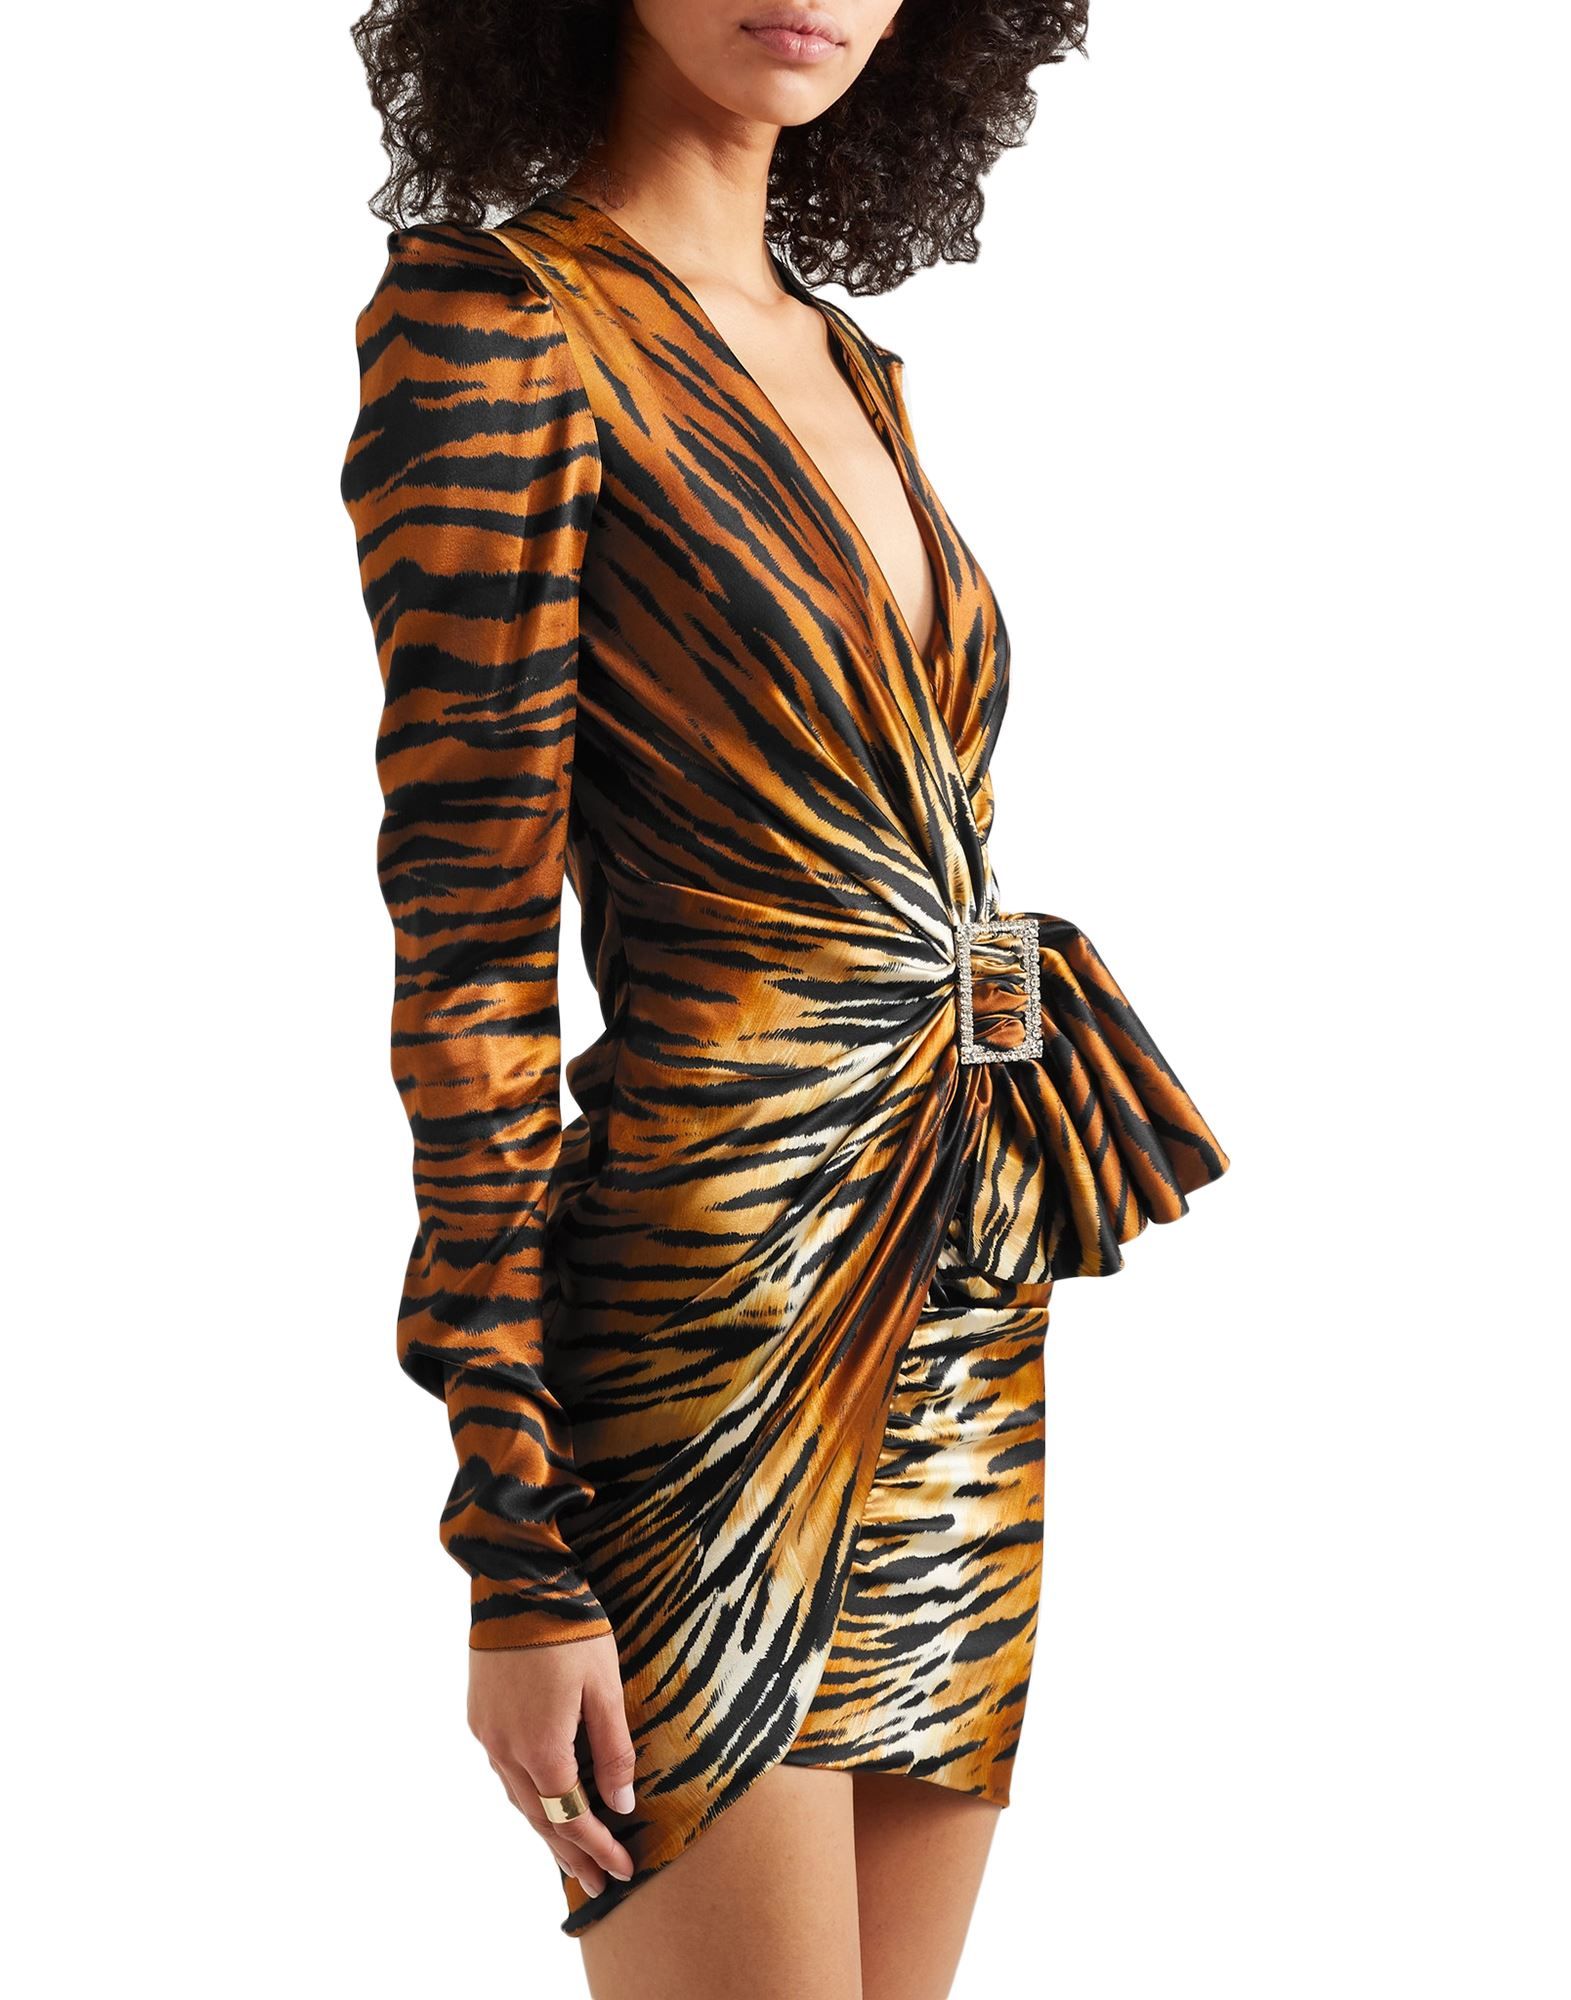 satin, draped detailing, contrasting applications, tiger stripes, deep neckline, long sleeves, no pockets, side closure, zipper closure, fully lined, stretch